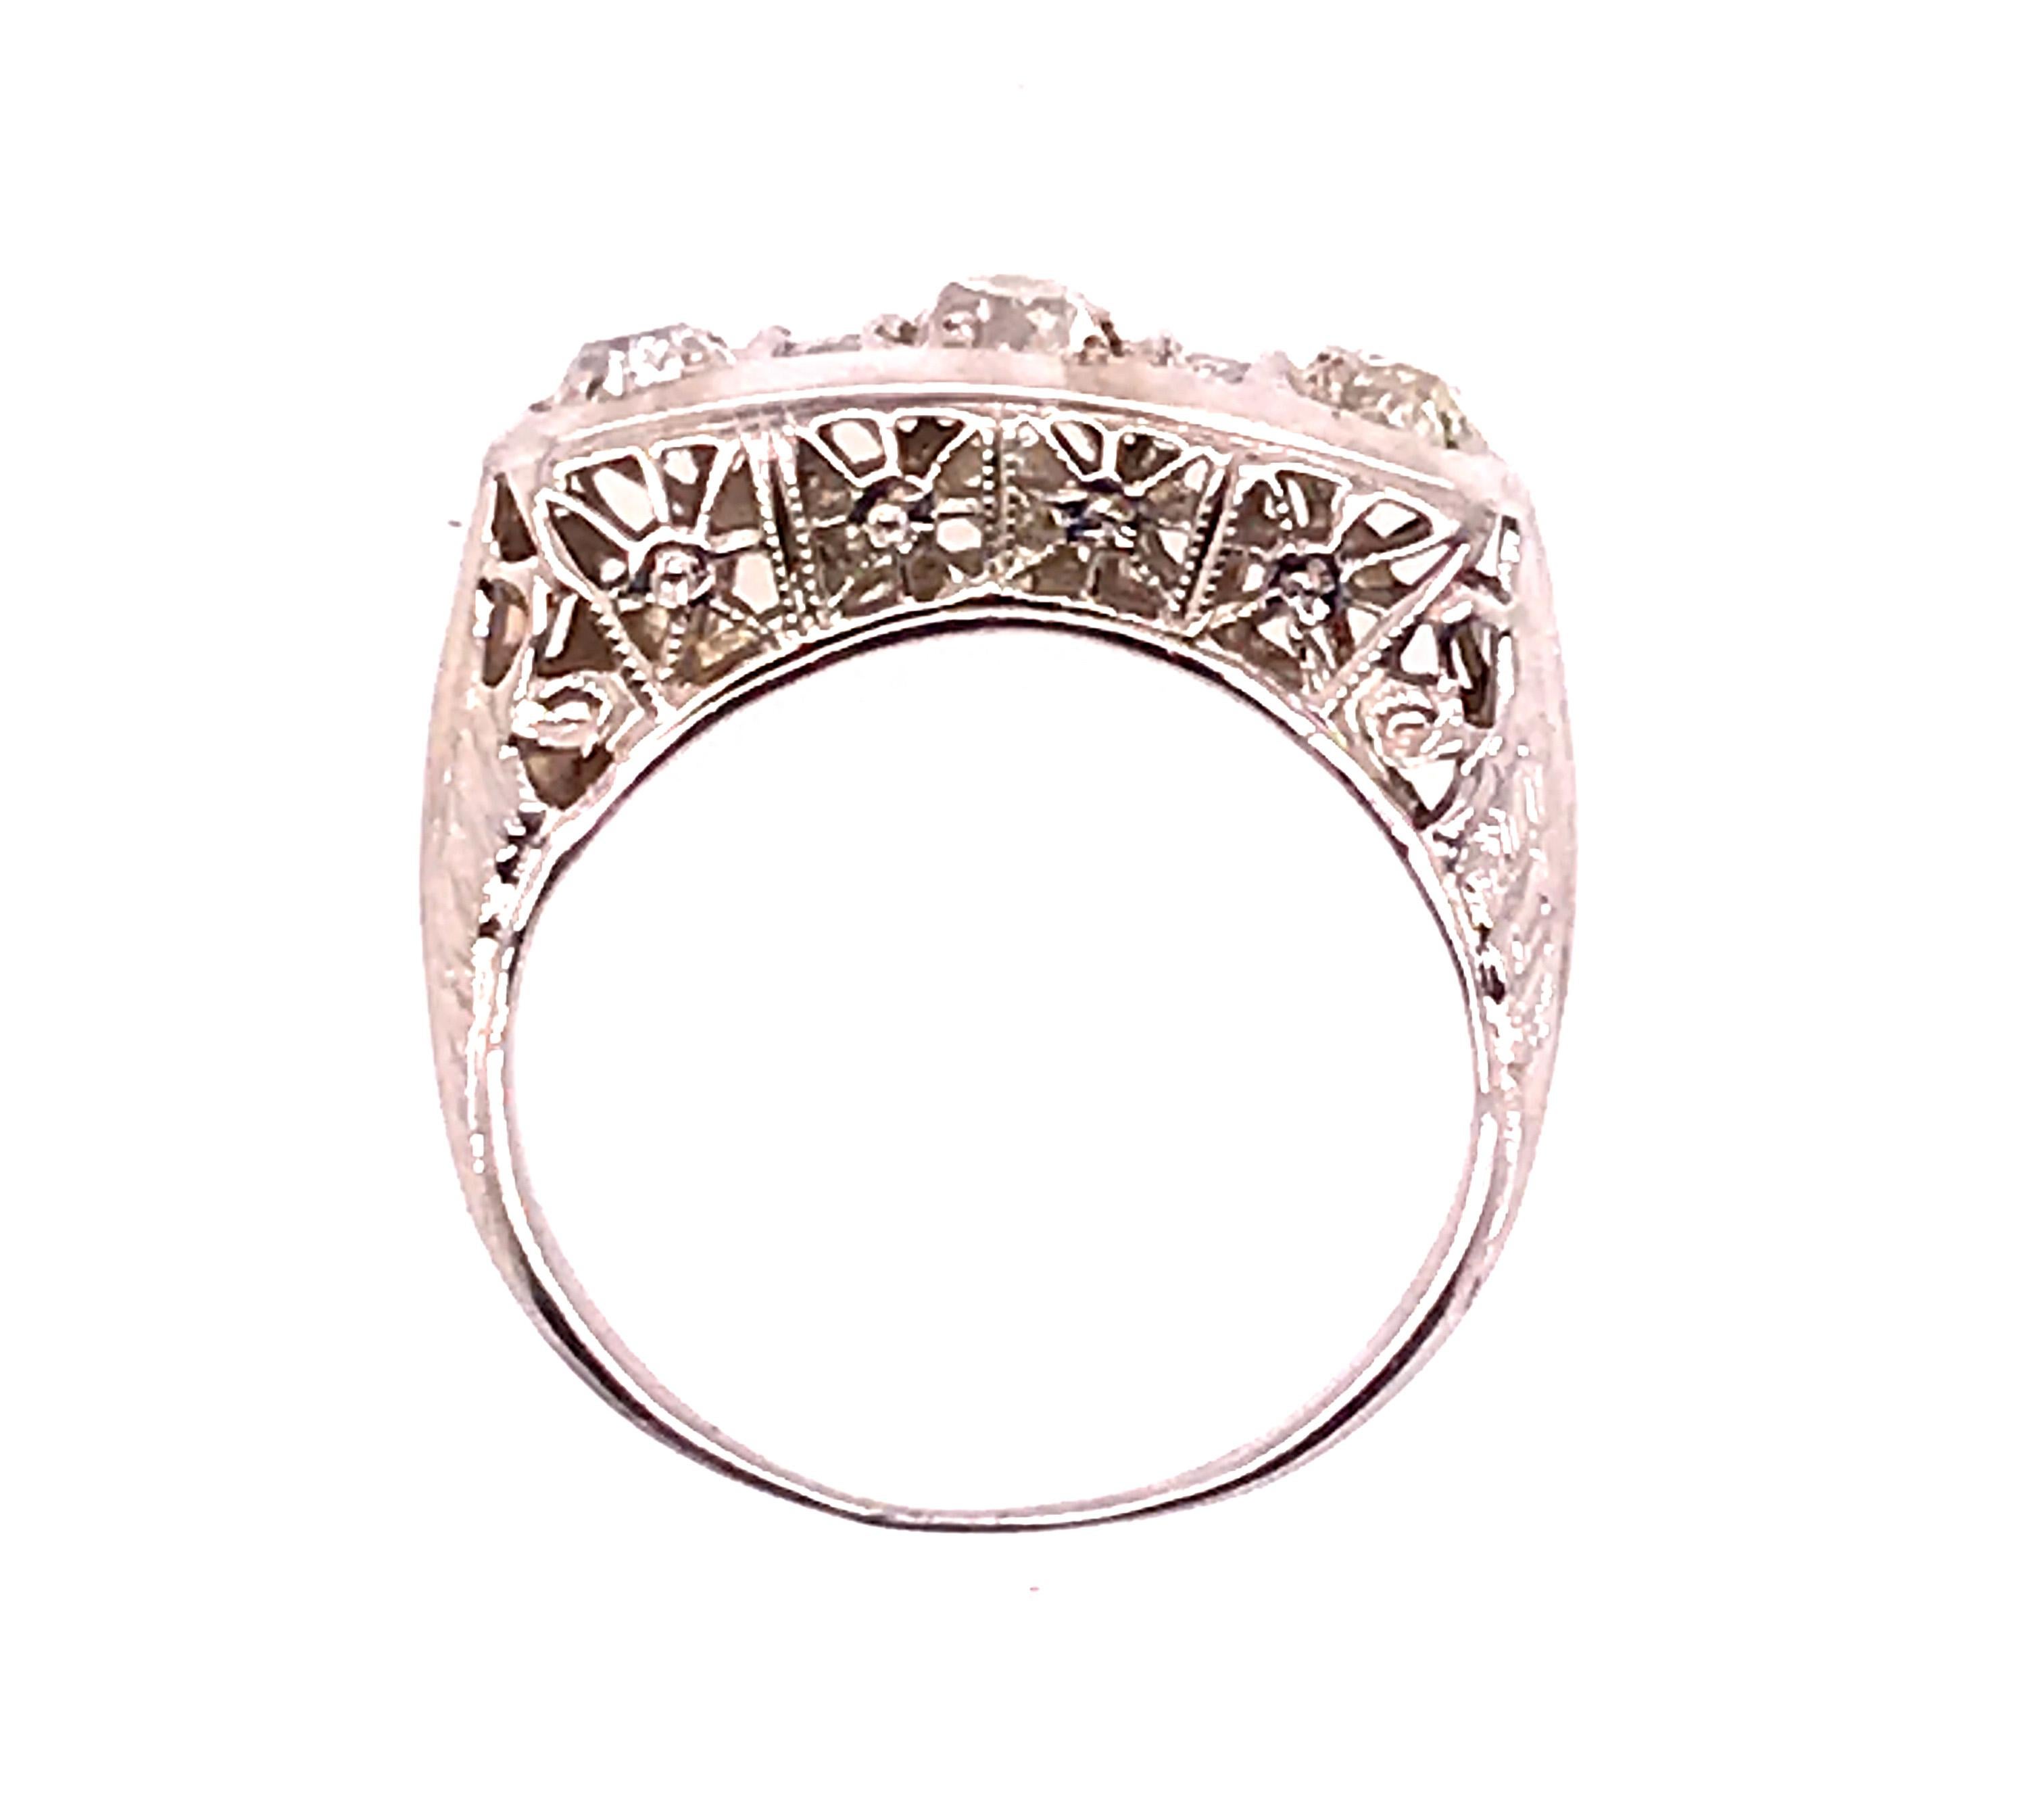 Genuine Original Antique from 1900s Vintage 3 Stone Diamond Cocktail Filigree Ring .70ct 18K Art Deco 


Features 3 Genuine Antique Old Mine Cushion Cut Center Diamonds

Antique Vintage Style with Elegance 

Beautiful Hand Carved Filigree and